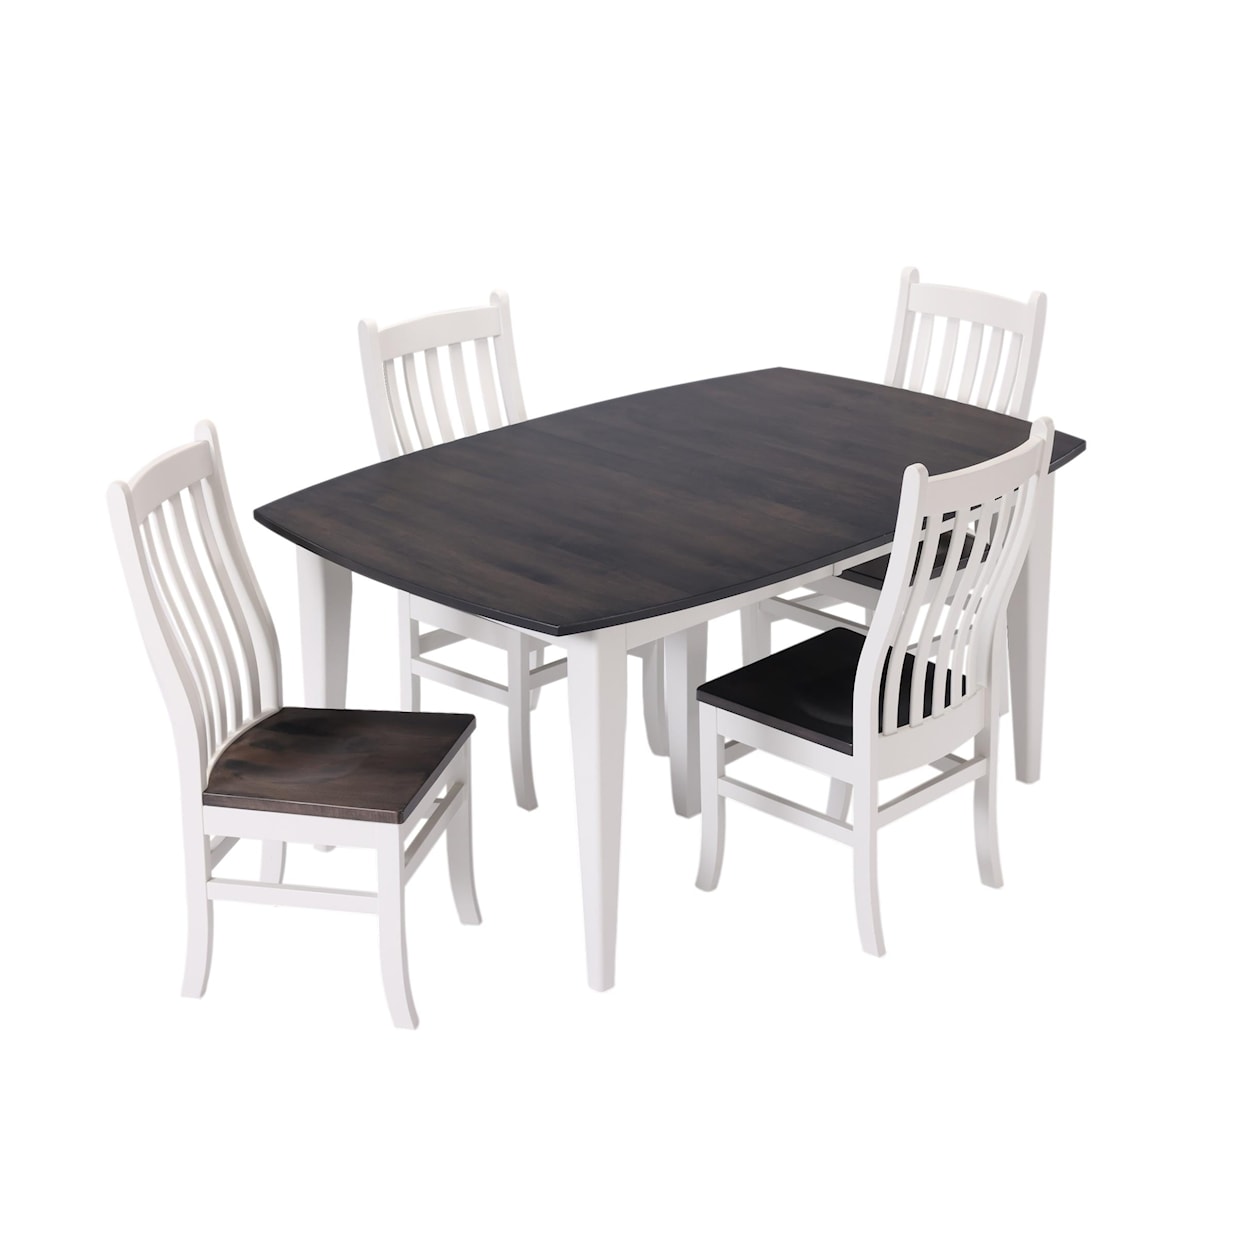 L.J. Gascho Furniture Maiden 9 Piece Casual Dining Set